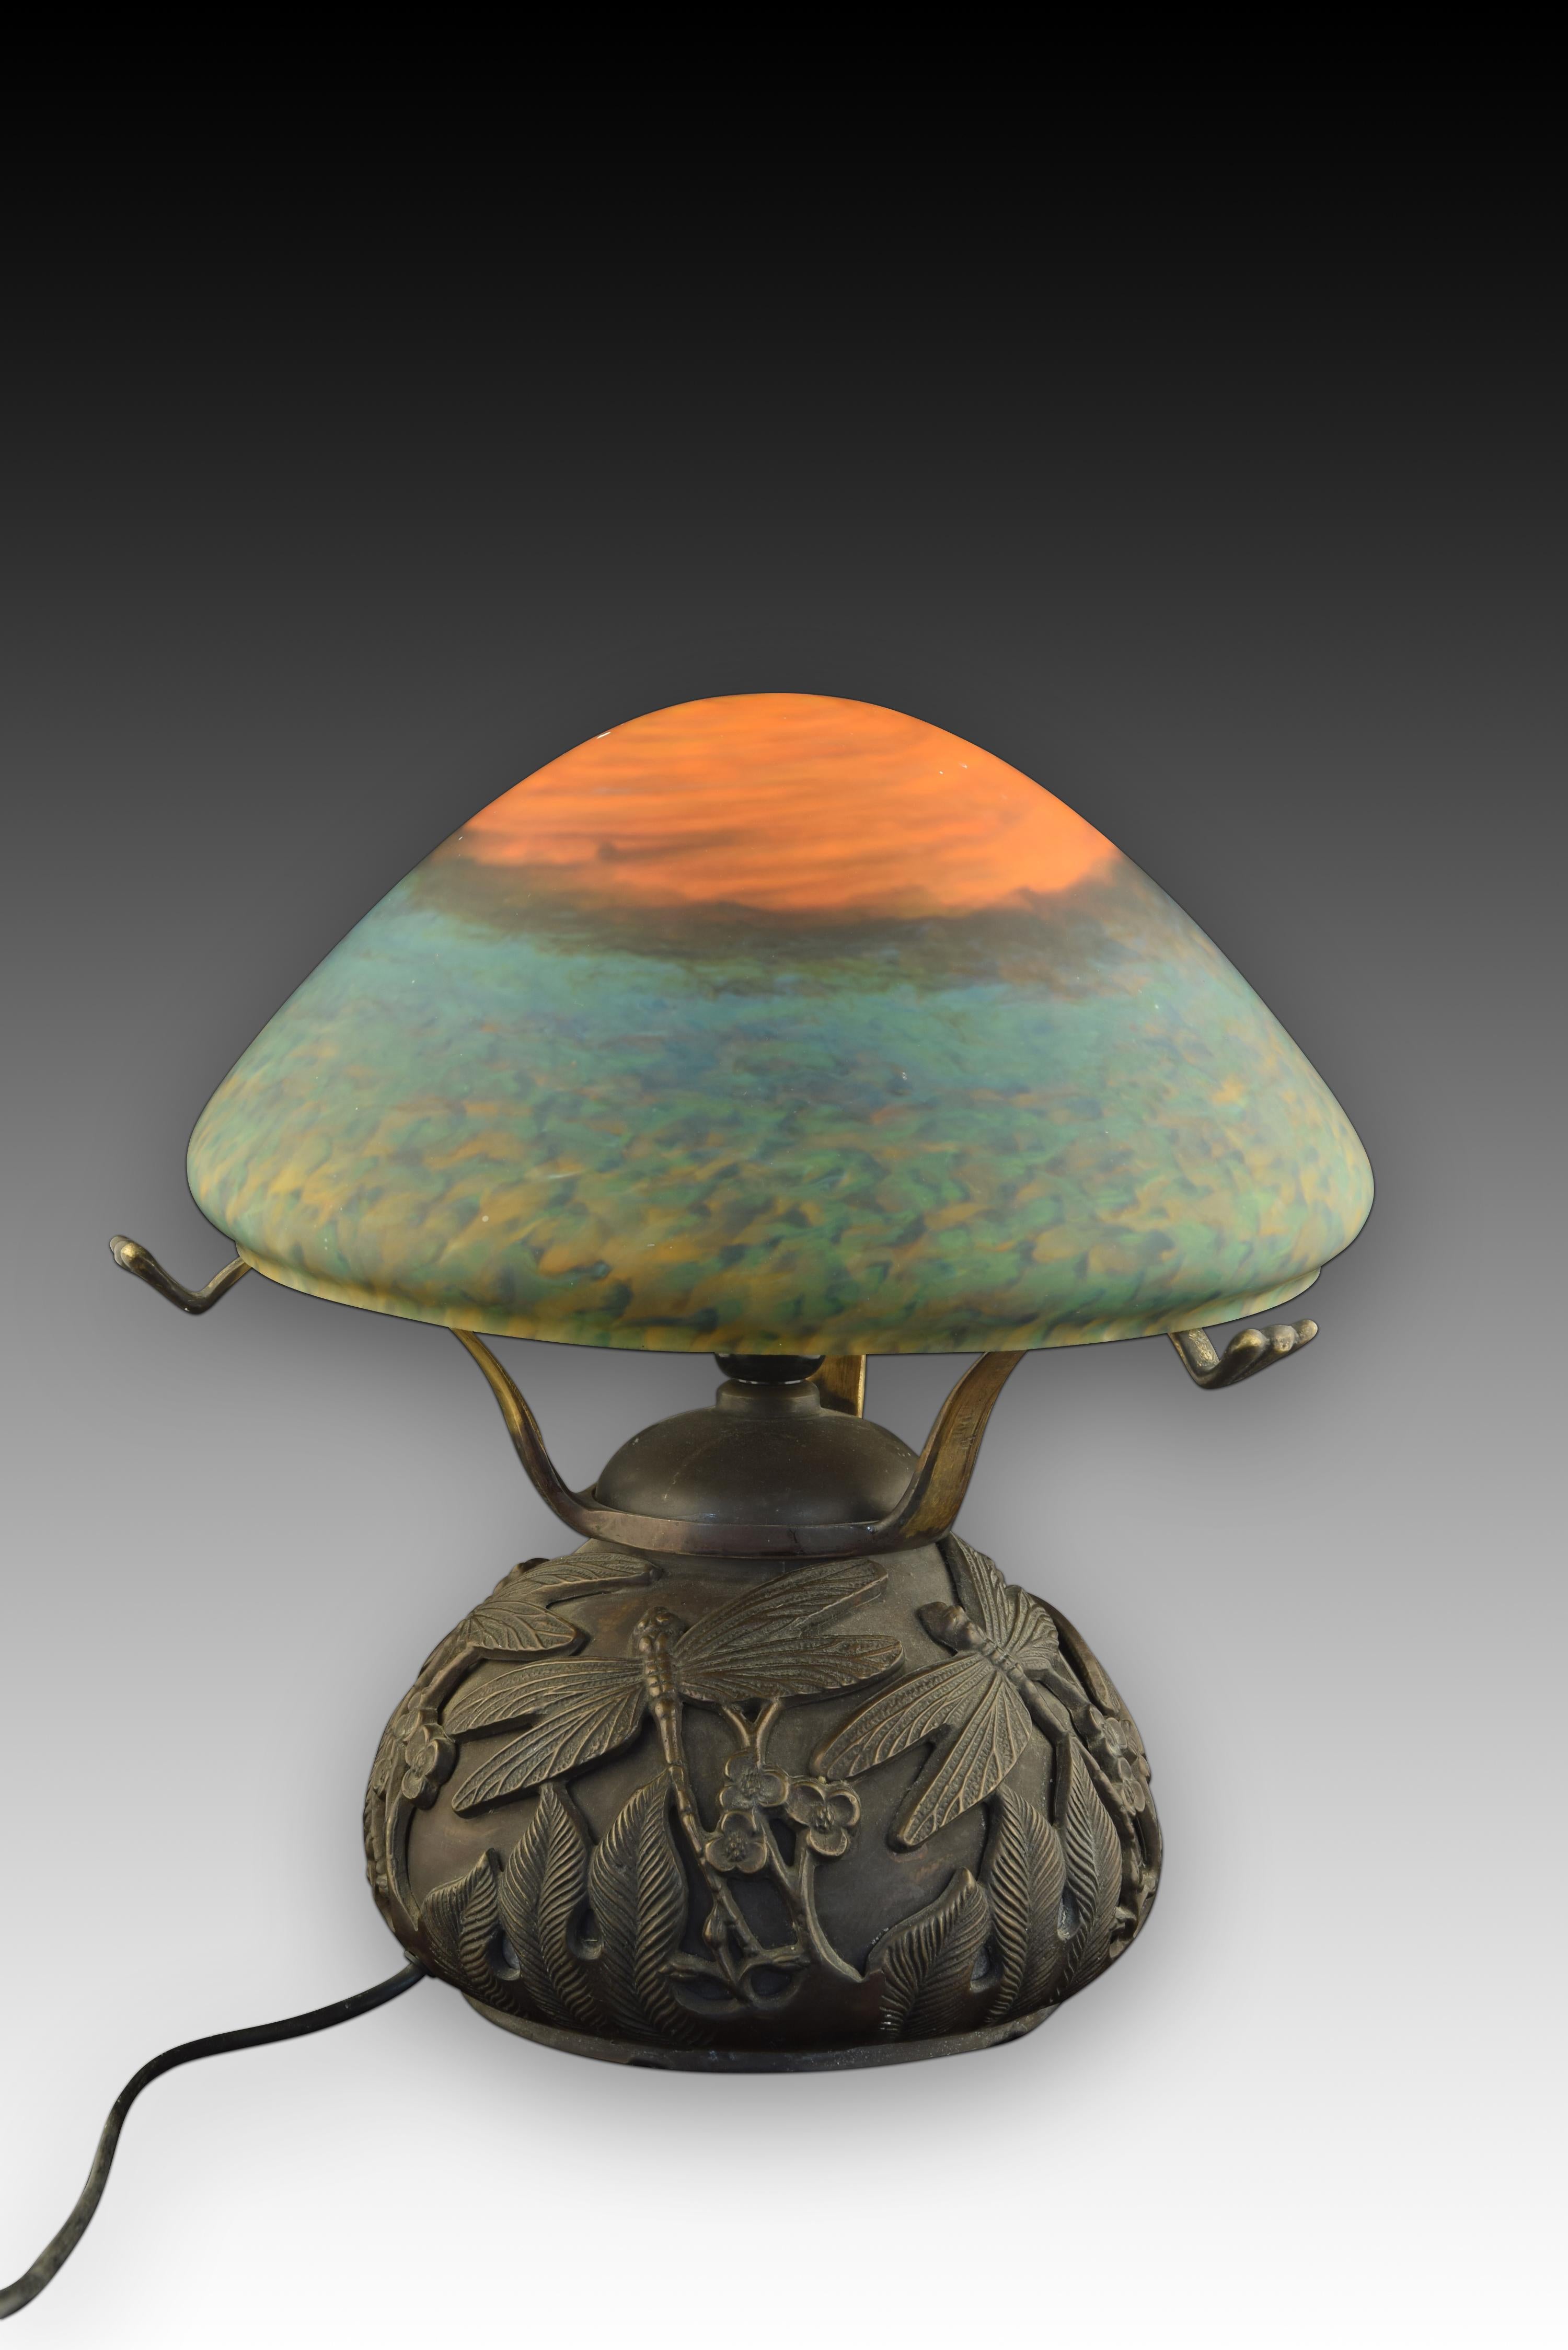 Art Nouveau style table lamp. Bronze, glass. 
Table lamp with a bronze base decorated with dragonflies, leaves, flowers, etc., clearly inspired by Art Nouveau pieces. The lampshade is made of glass, and has various colors. 
Weight: 8.1 kg. Size: